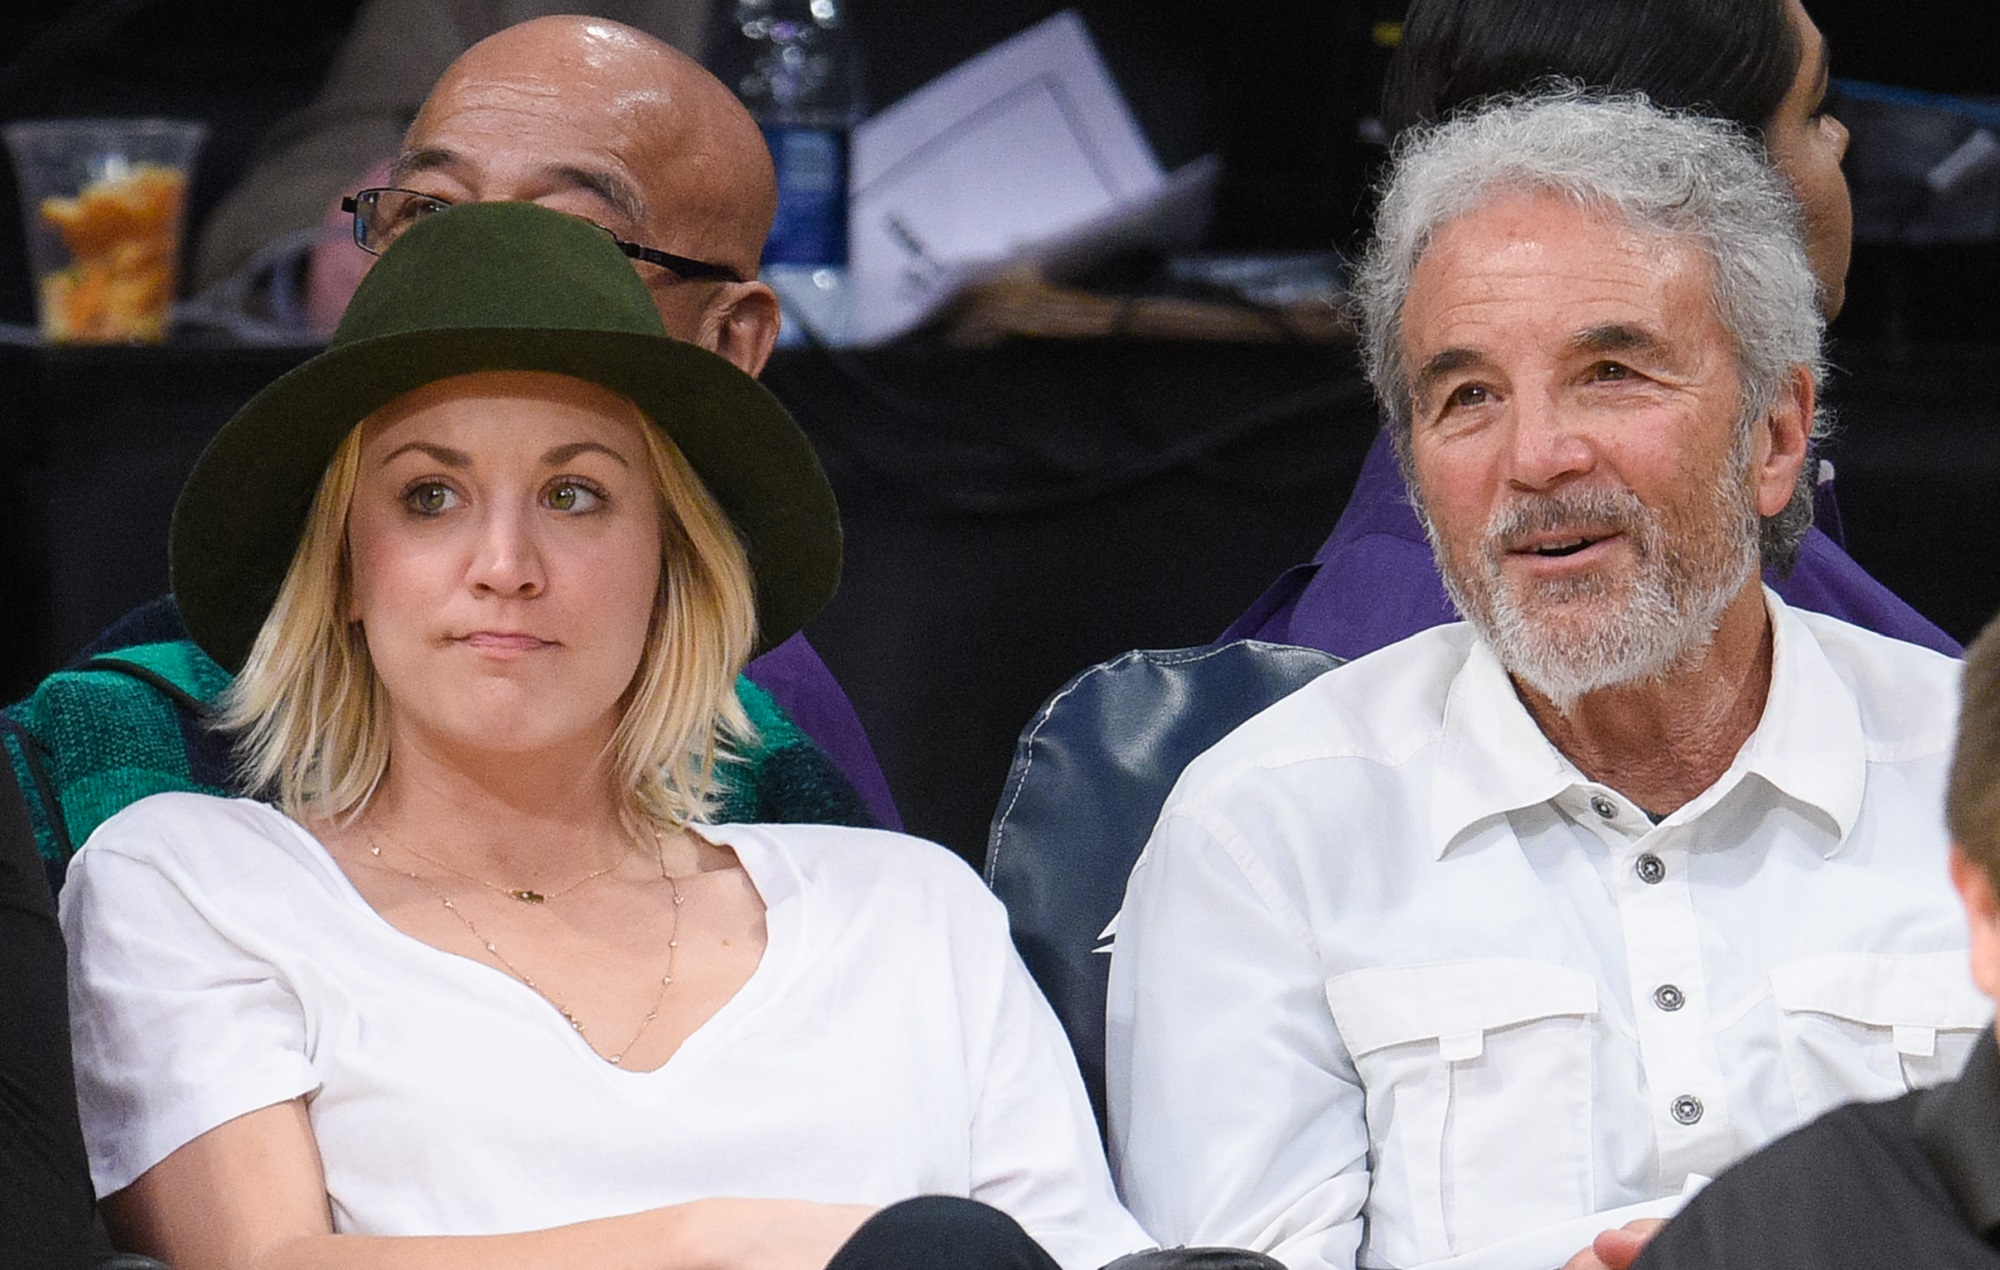 All You need to know about Kaley Cuoco’s Dad Gary Carmine Cuoco’s Age